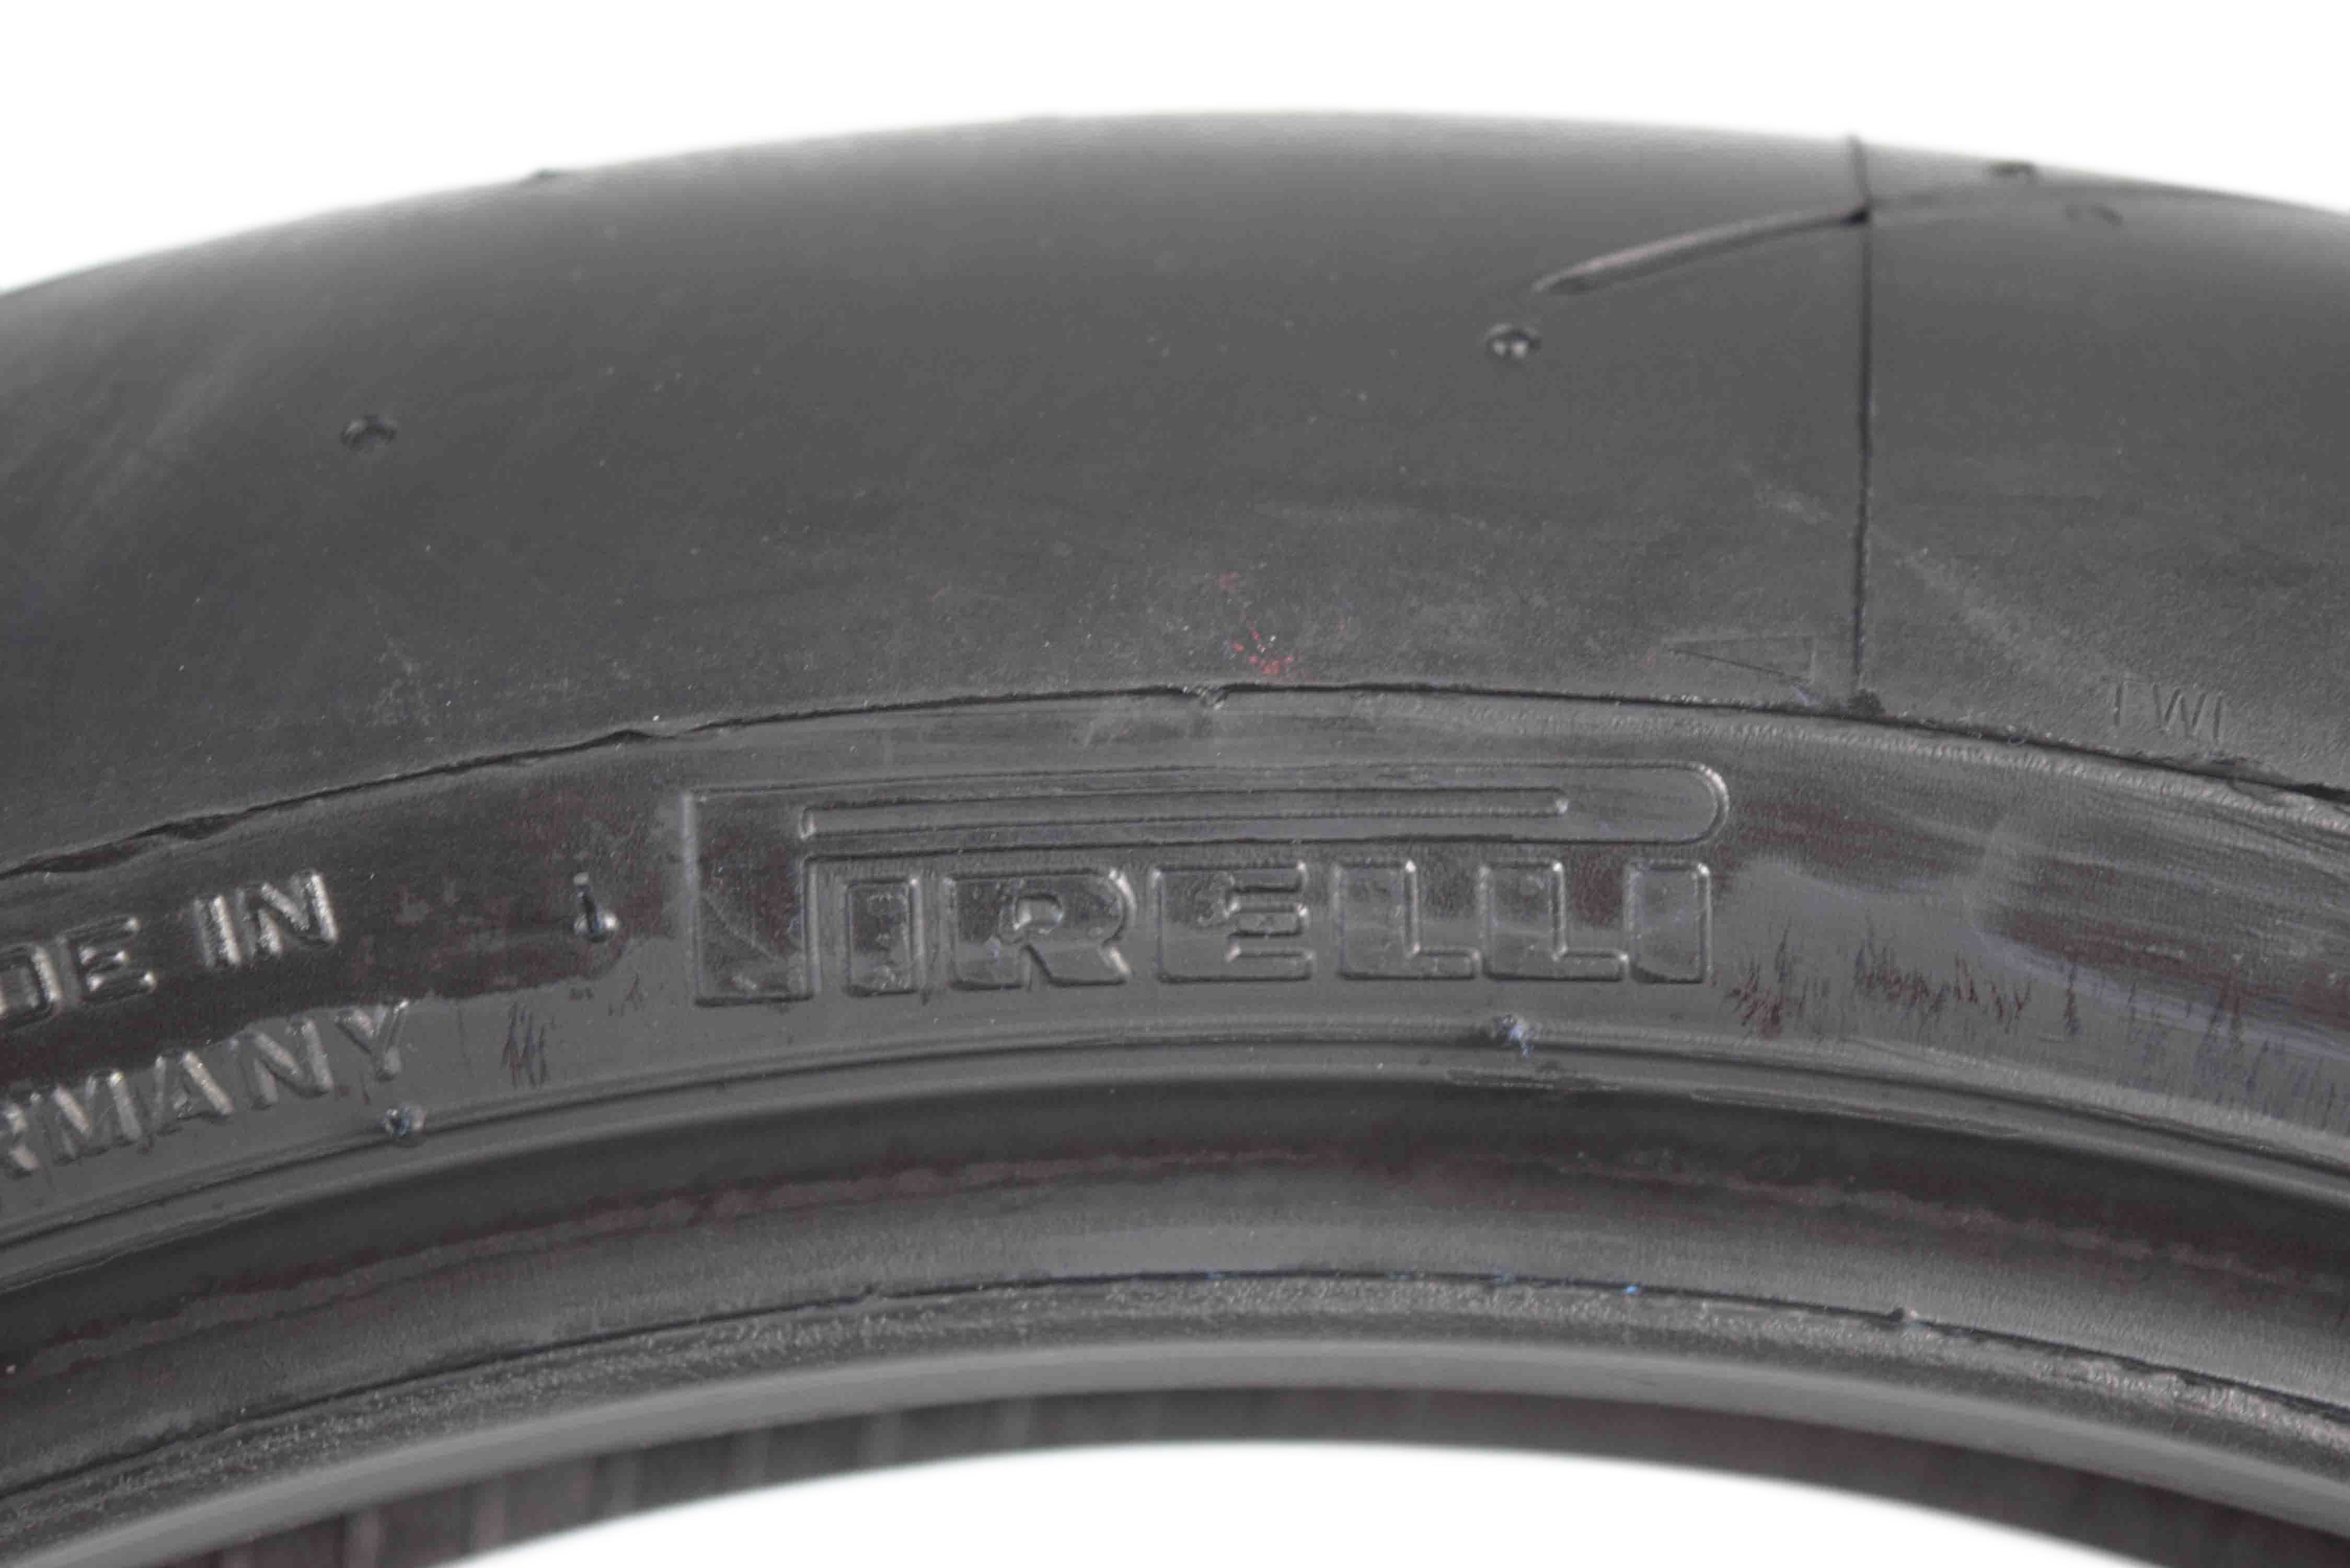 Pirelli-Tires-Front-120-70ZR17-Rear-190-50ZR17-Super-Corsa-V2-Motorcycle-Tires-image-5